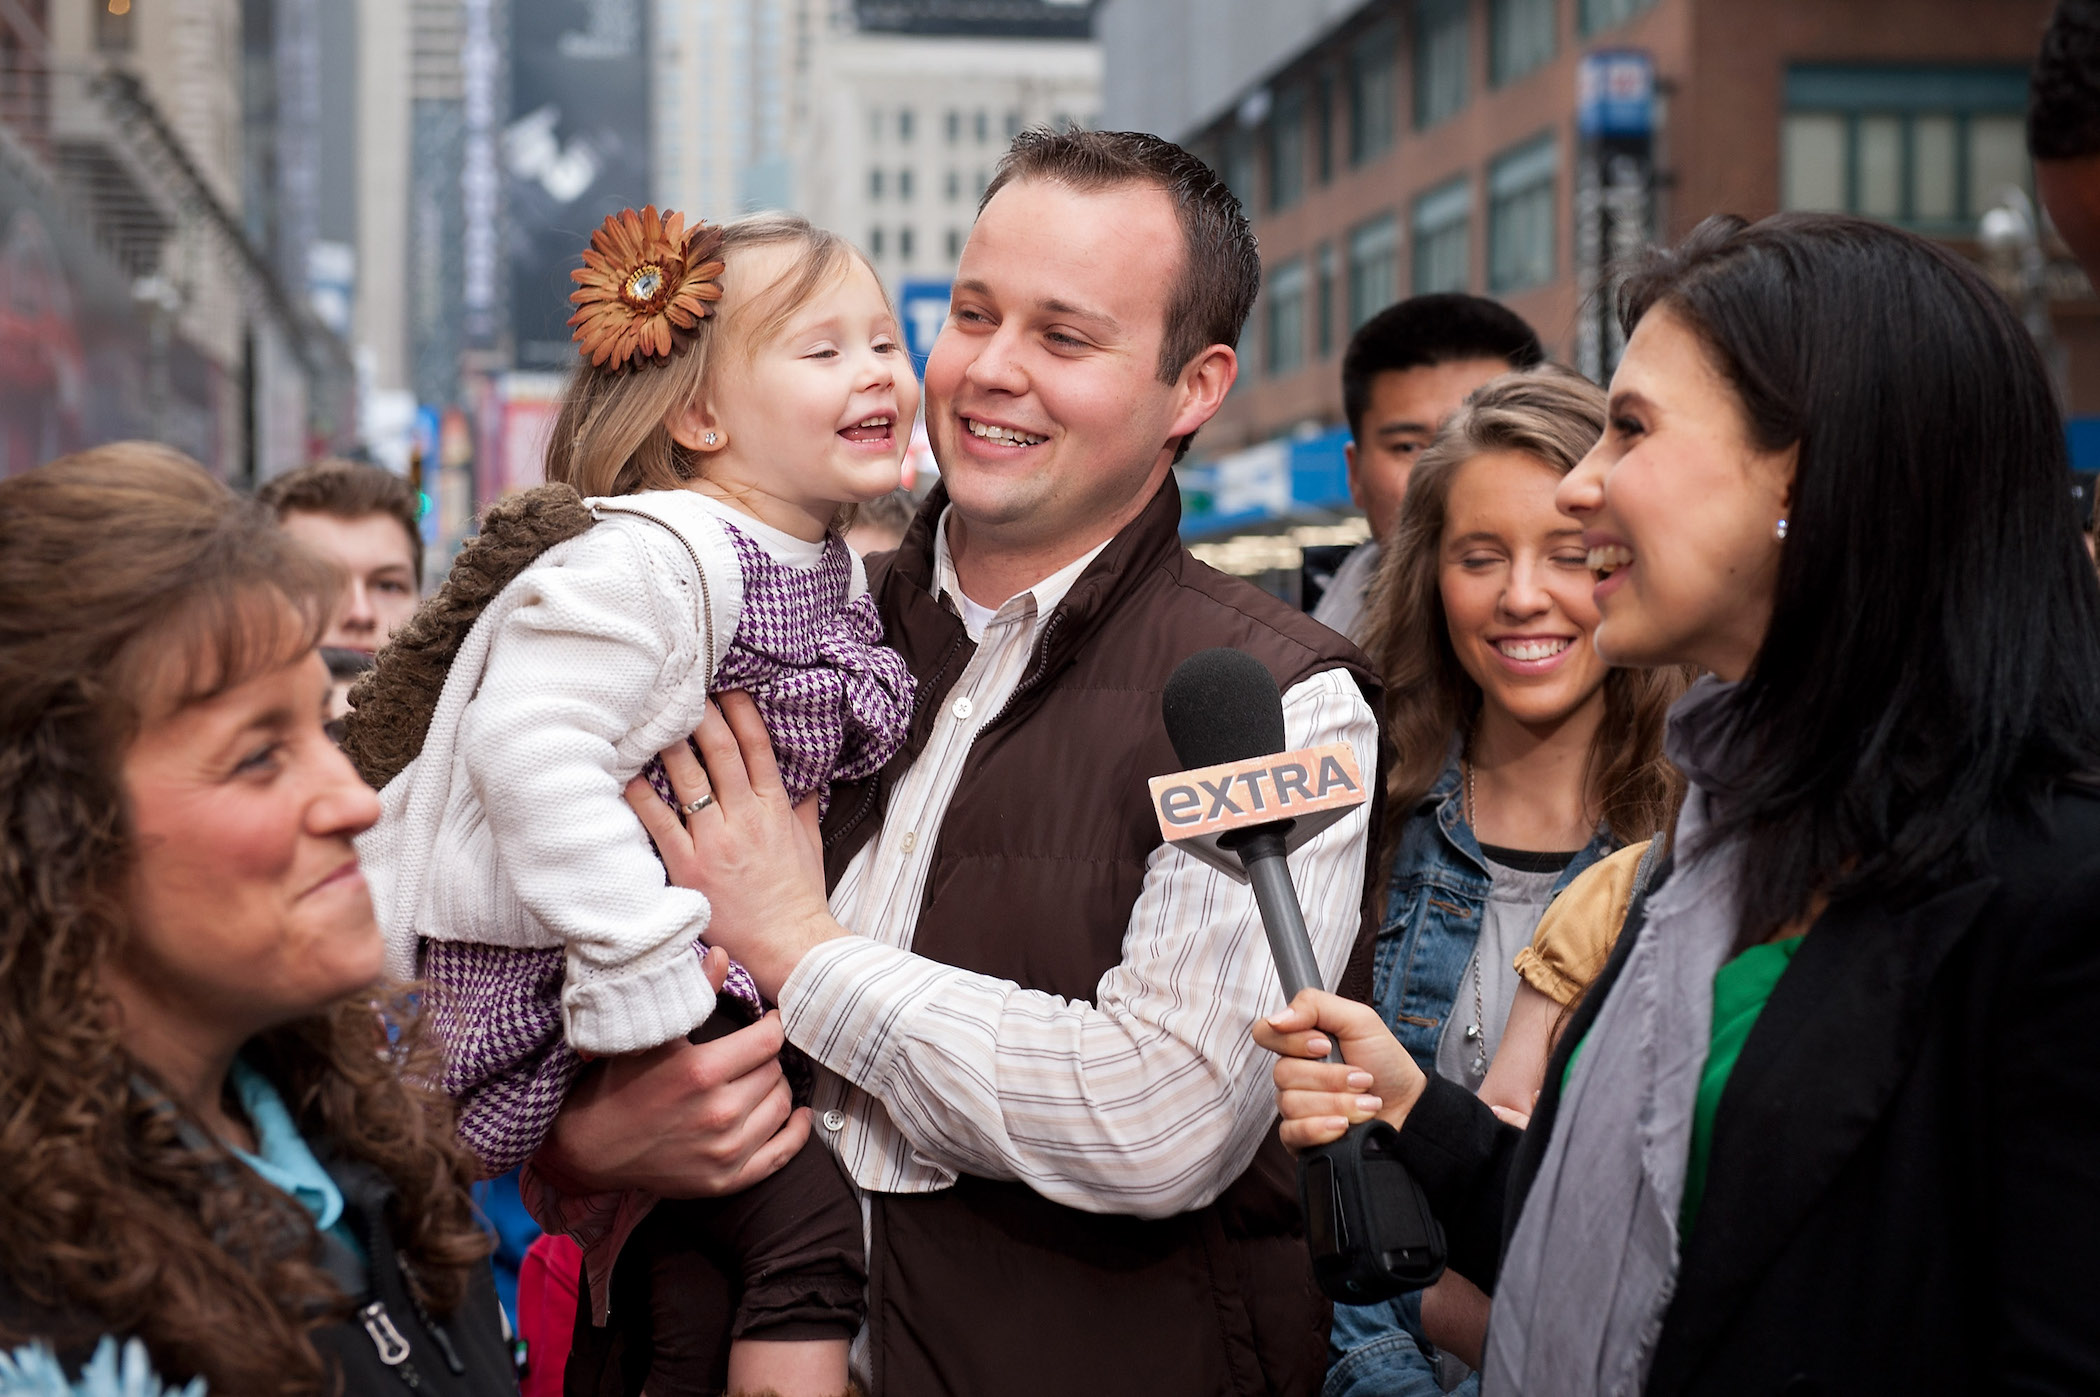 Josh Duggar and his daughter during their visit with 'Extra'  surrounded by the rest of the Duggar family outdoors